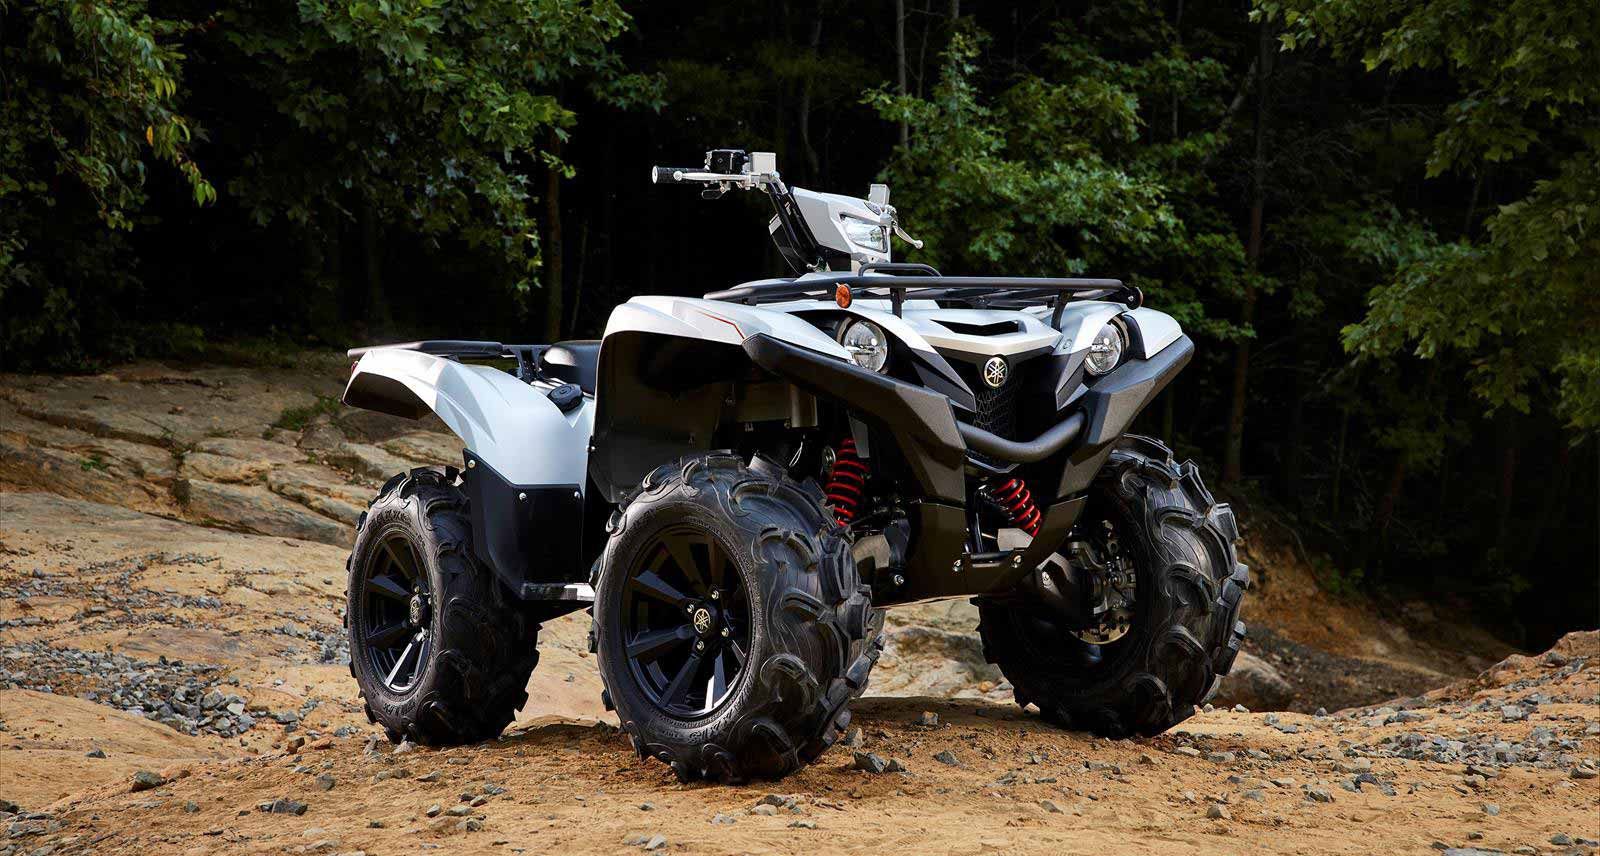 Yamaha Grizzly EPS for sale at Wild West Motorsports.